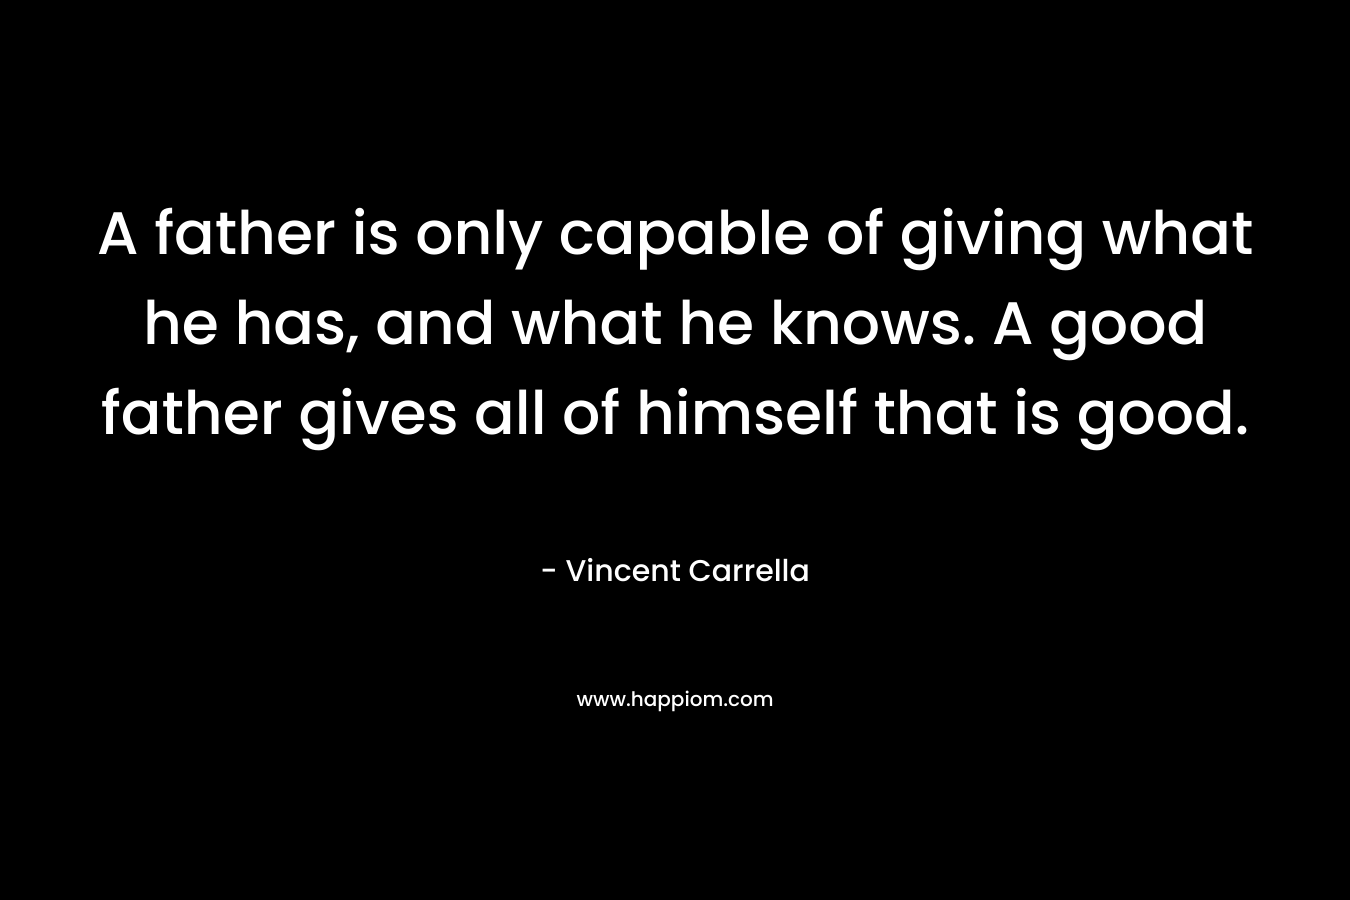 A father is only capable of giving what he has, and what he knows. A good father gives all of himself that is good. – Vincent Carrella